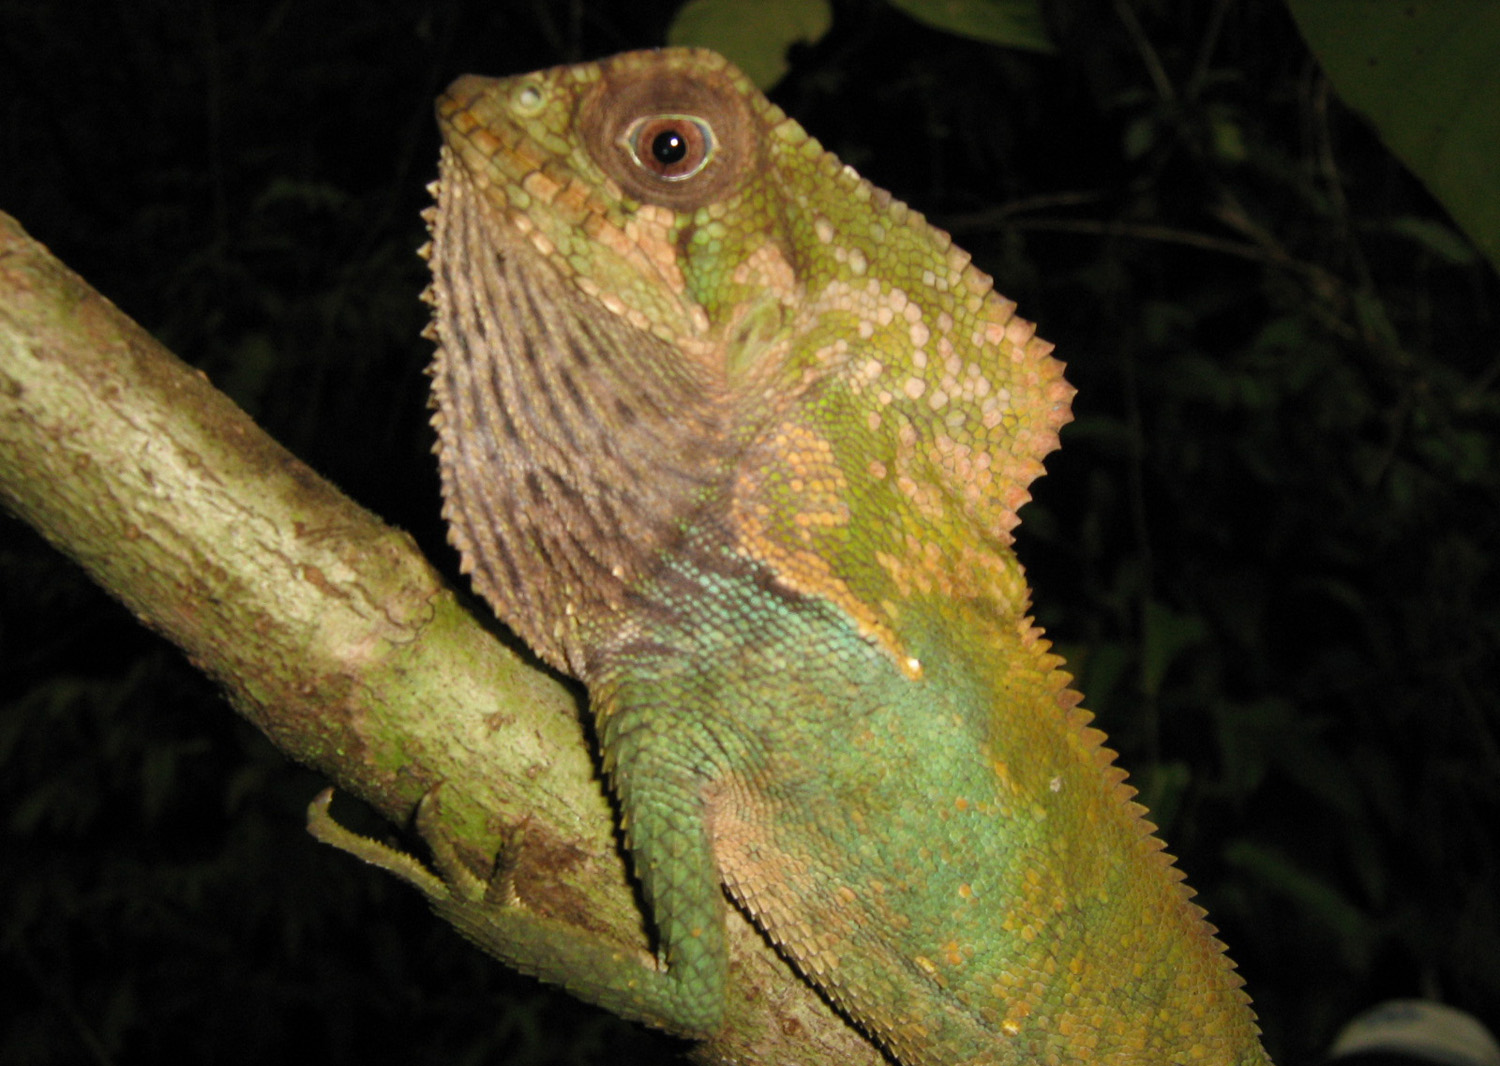 One of Costa Rica's igunas that can be seen from the lodge